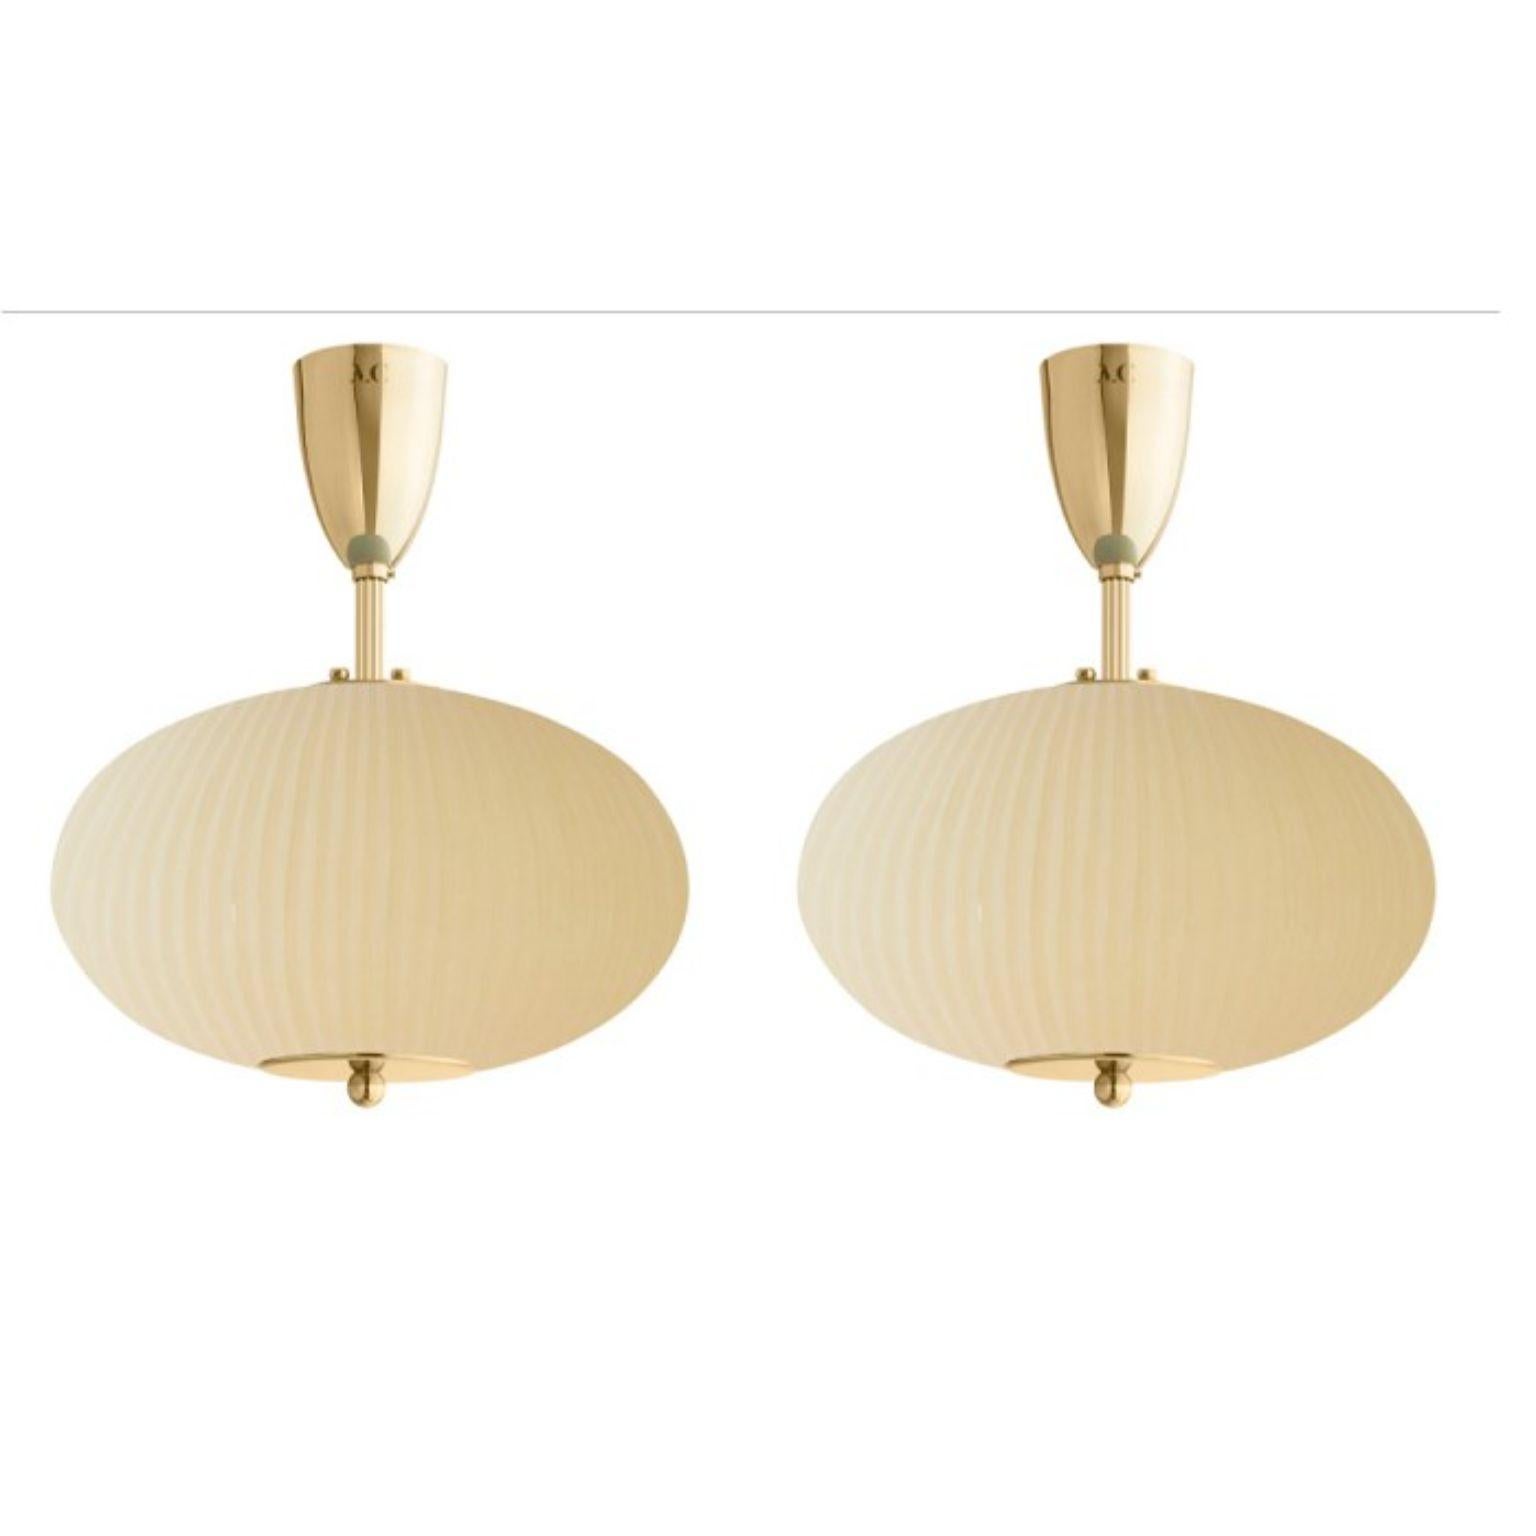 Ceiling lamp China 07 by Magic Circus Editions
Dimensions: H 40 x W 32 x D 32 cm
Materials: brass, mouth blown glass sculpted with a diamond saw
Colour: mustard yellow

Available finishes: brass, nickel
Available colors: enamel soft white,